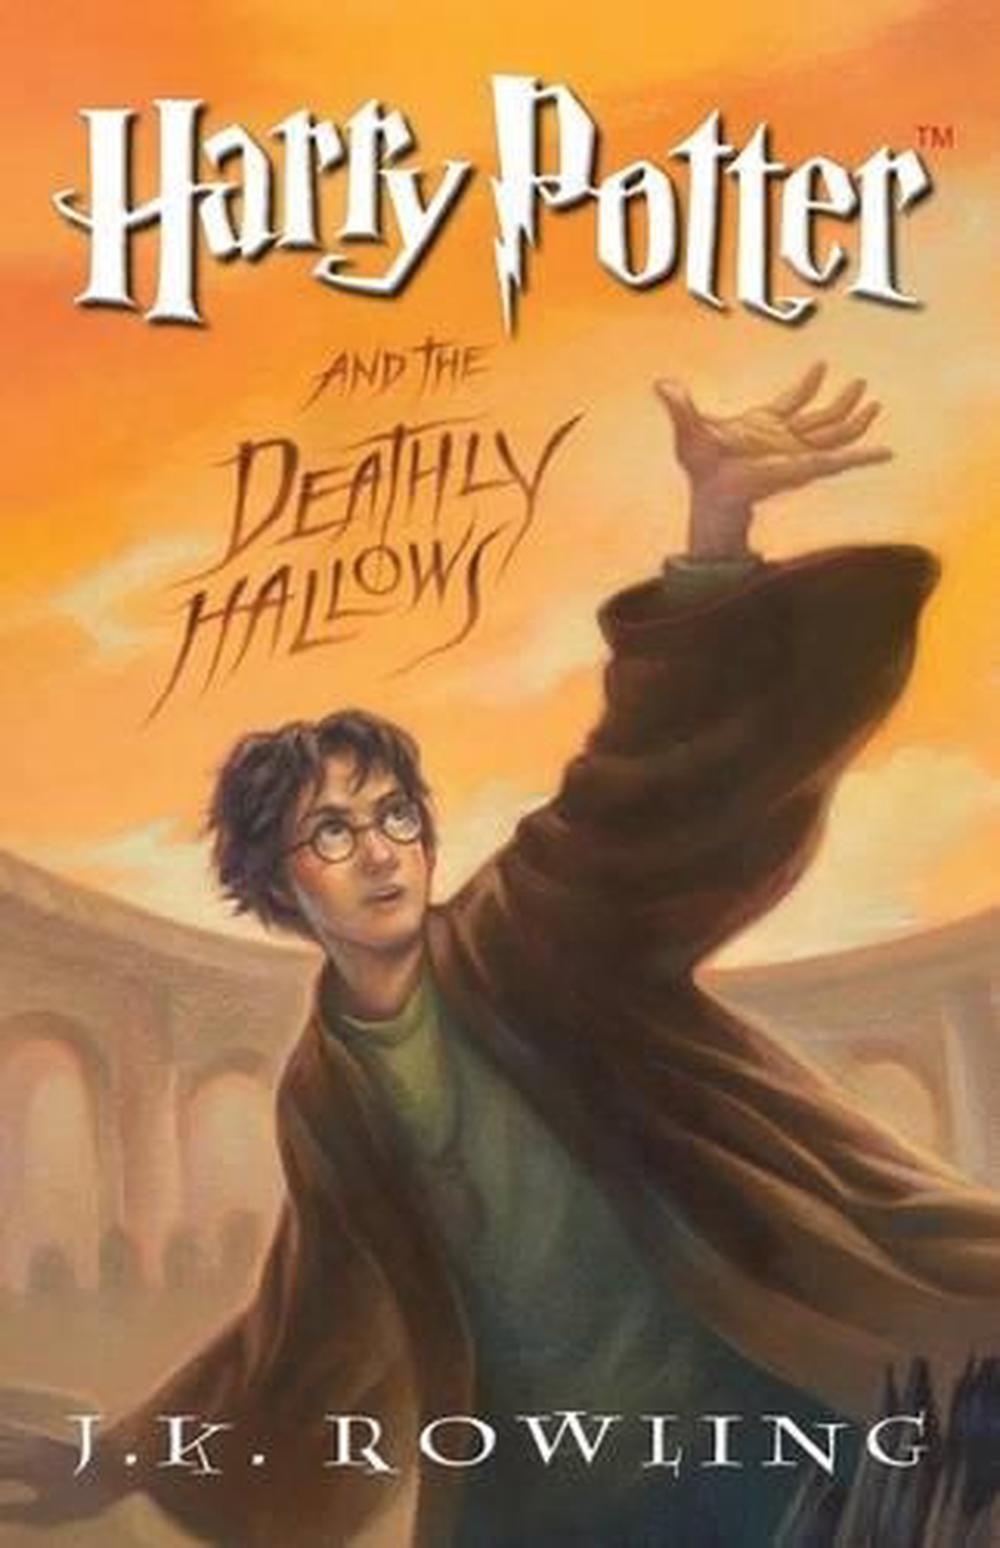 harry potter and the deathly hallows by jk rowling